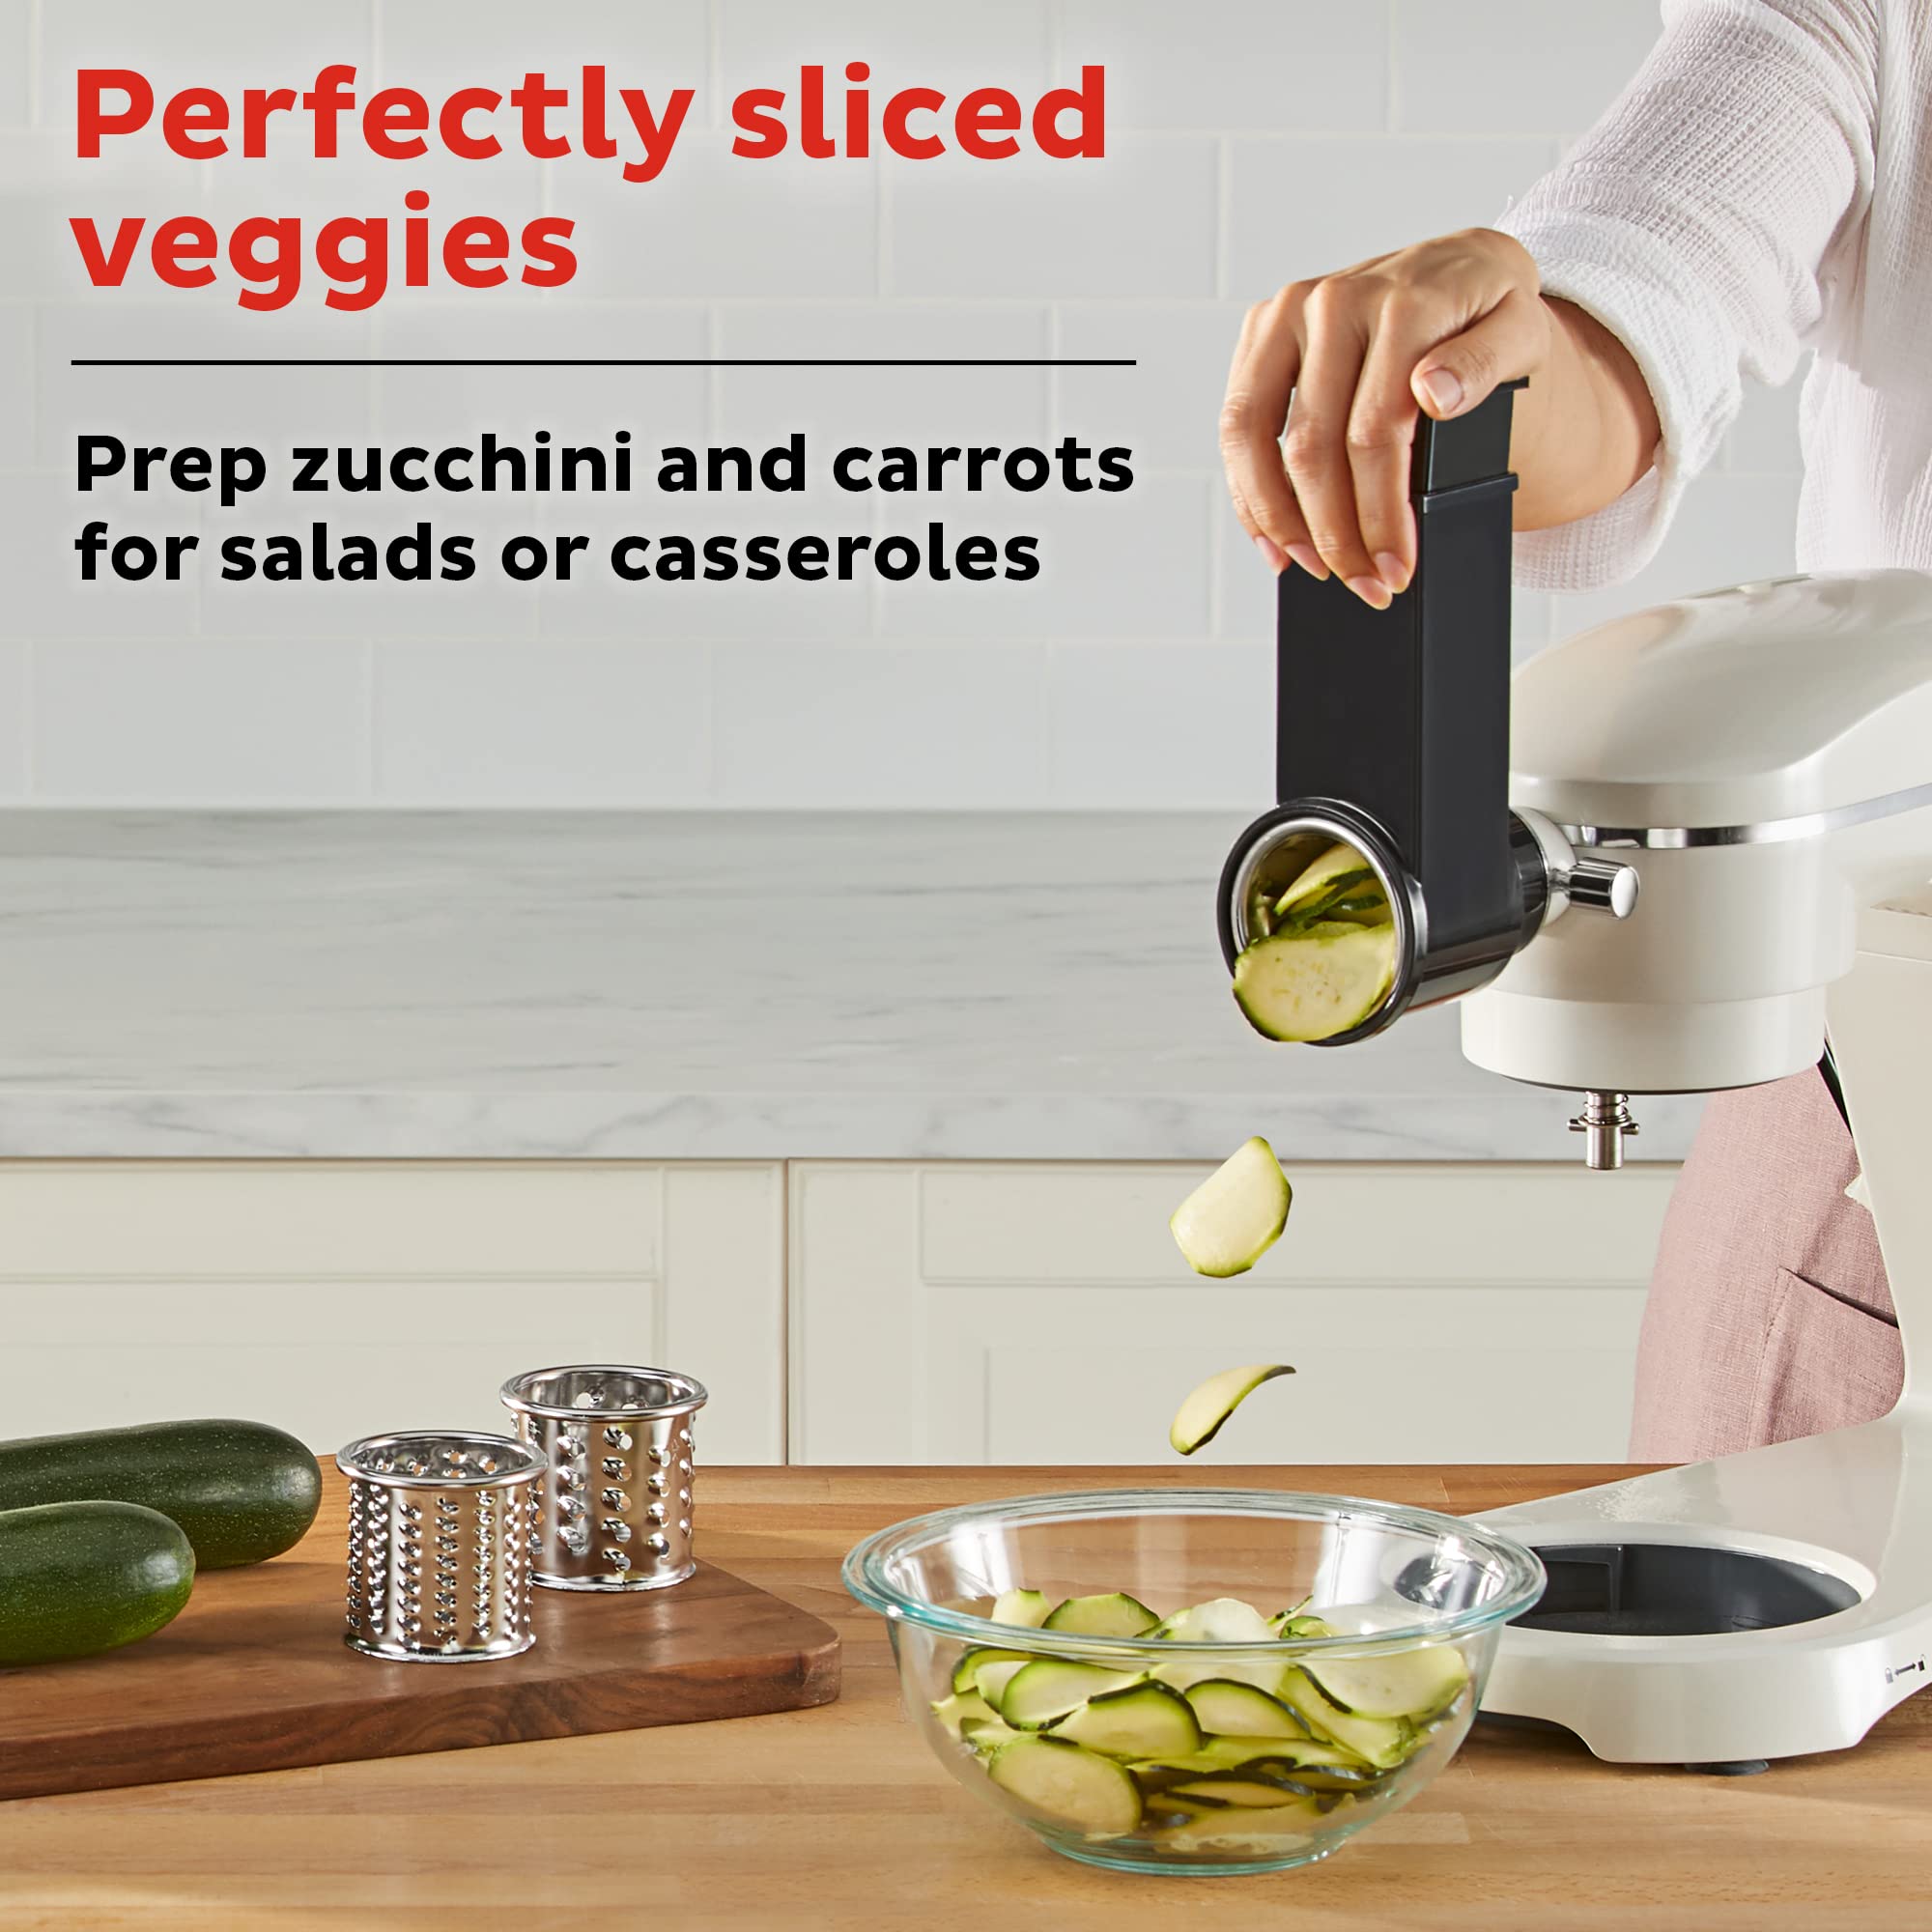 Instant Pot Slicer/ Shredder Attachment for Instant Stand Mixer Pro, Includes 2 Shredding Blades, Slicing blade, Food Pusher and Feeder Housing, Vegetable Chopper, Cheese Grater Attachment